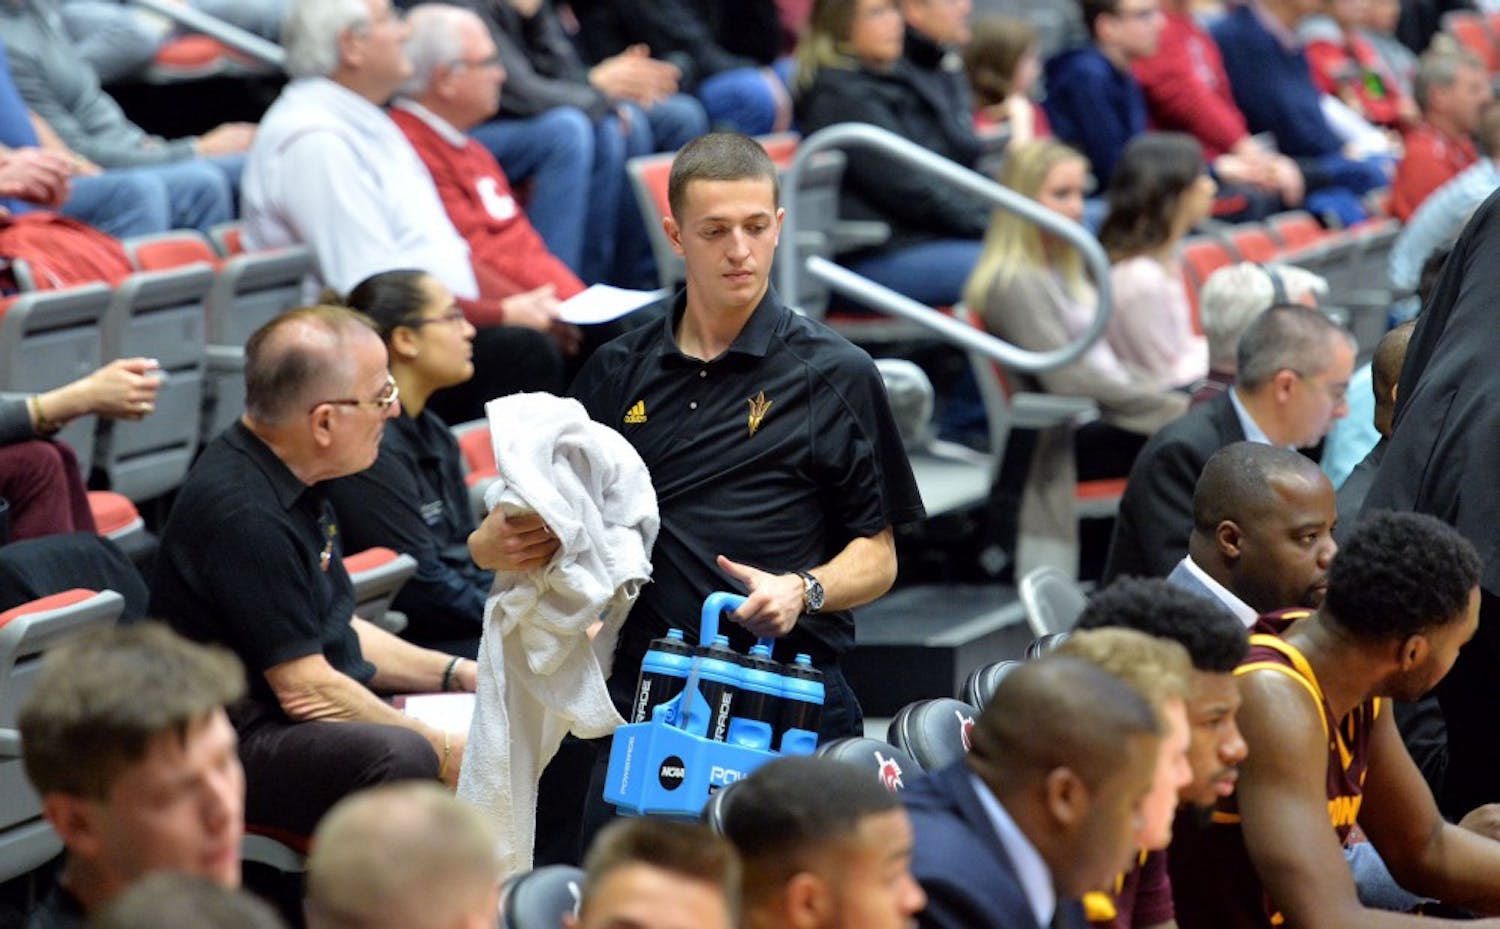 ASU men's&nbsp;basketball manager Scott Geerling carries water for players at a game against WSU at Beasley Coliseum in Pullman, Washington on Feb. 18, 2017.